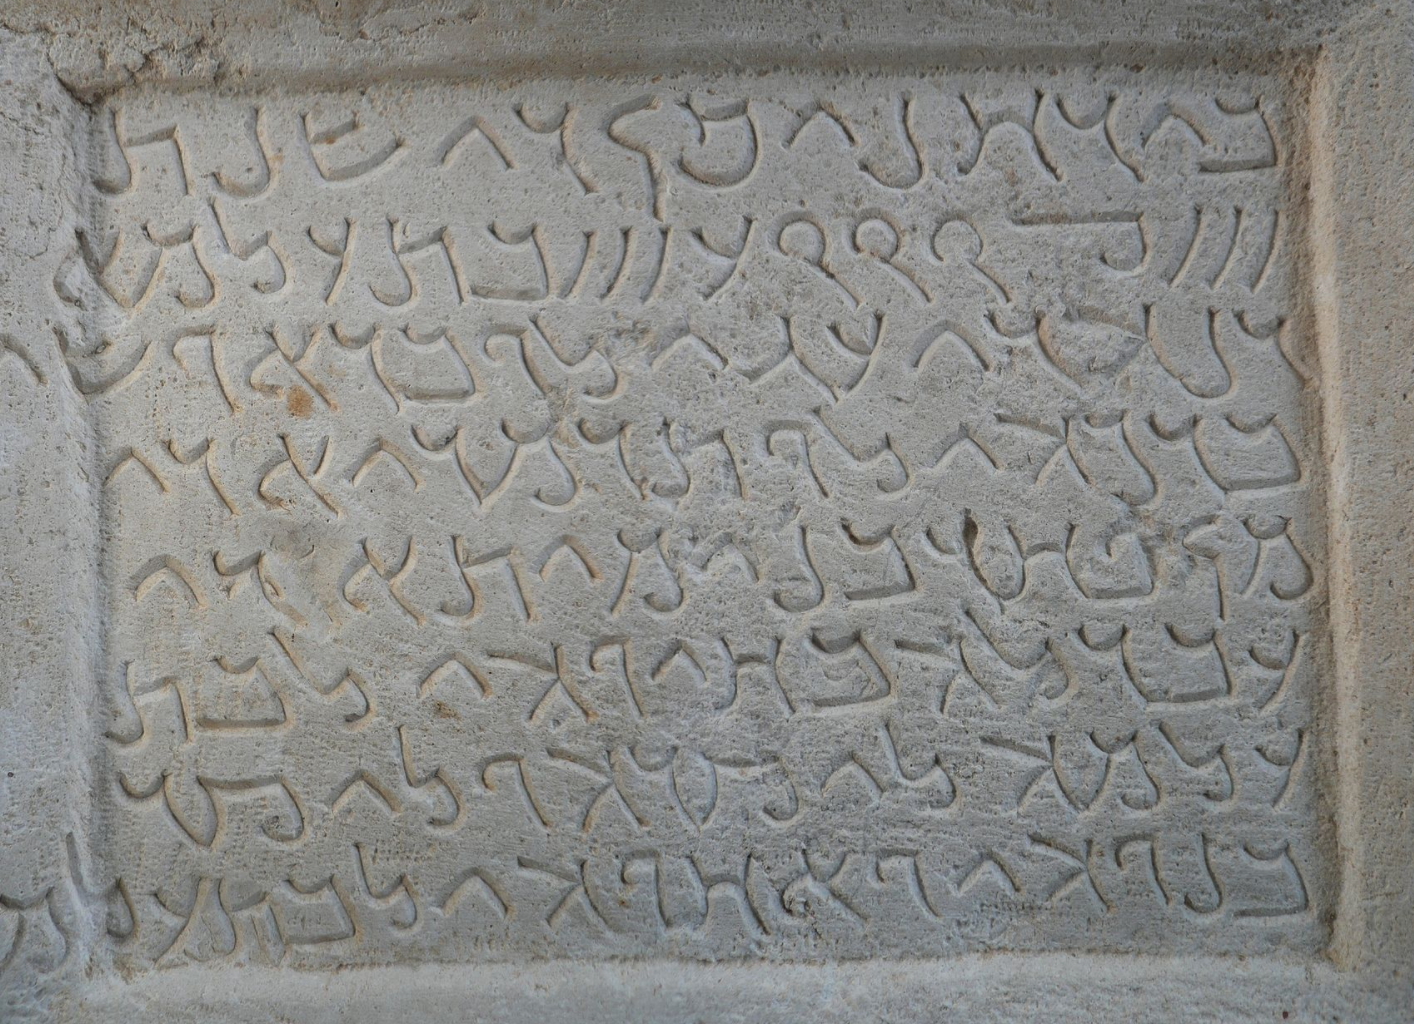 Palmyrenic inscription preserved in the Louvre.